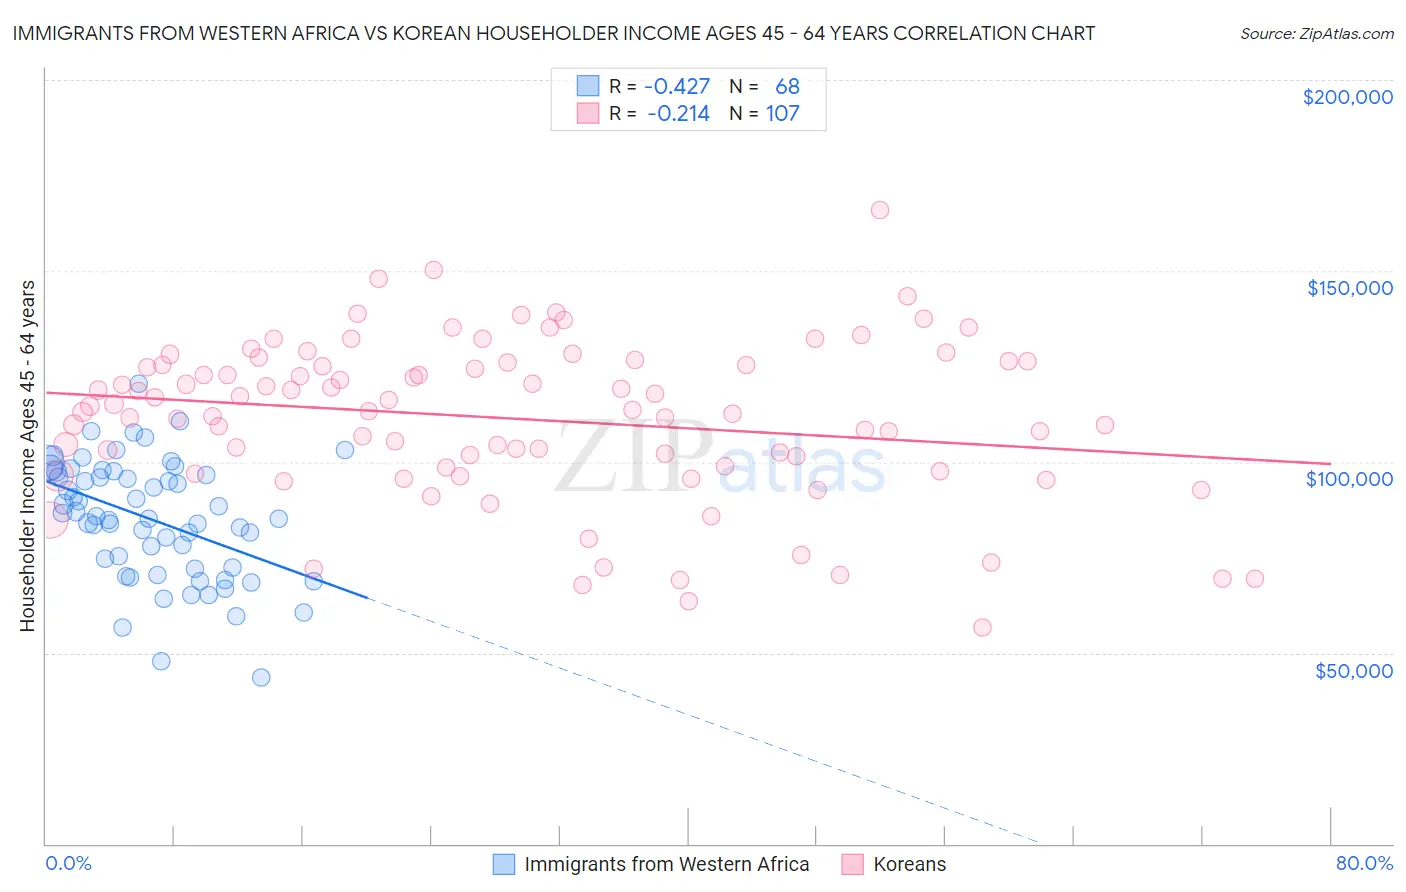 Immigrants from Western Africa vs Korean Householder Income Ages 45 - 64 years